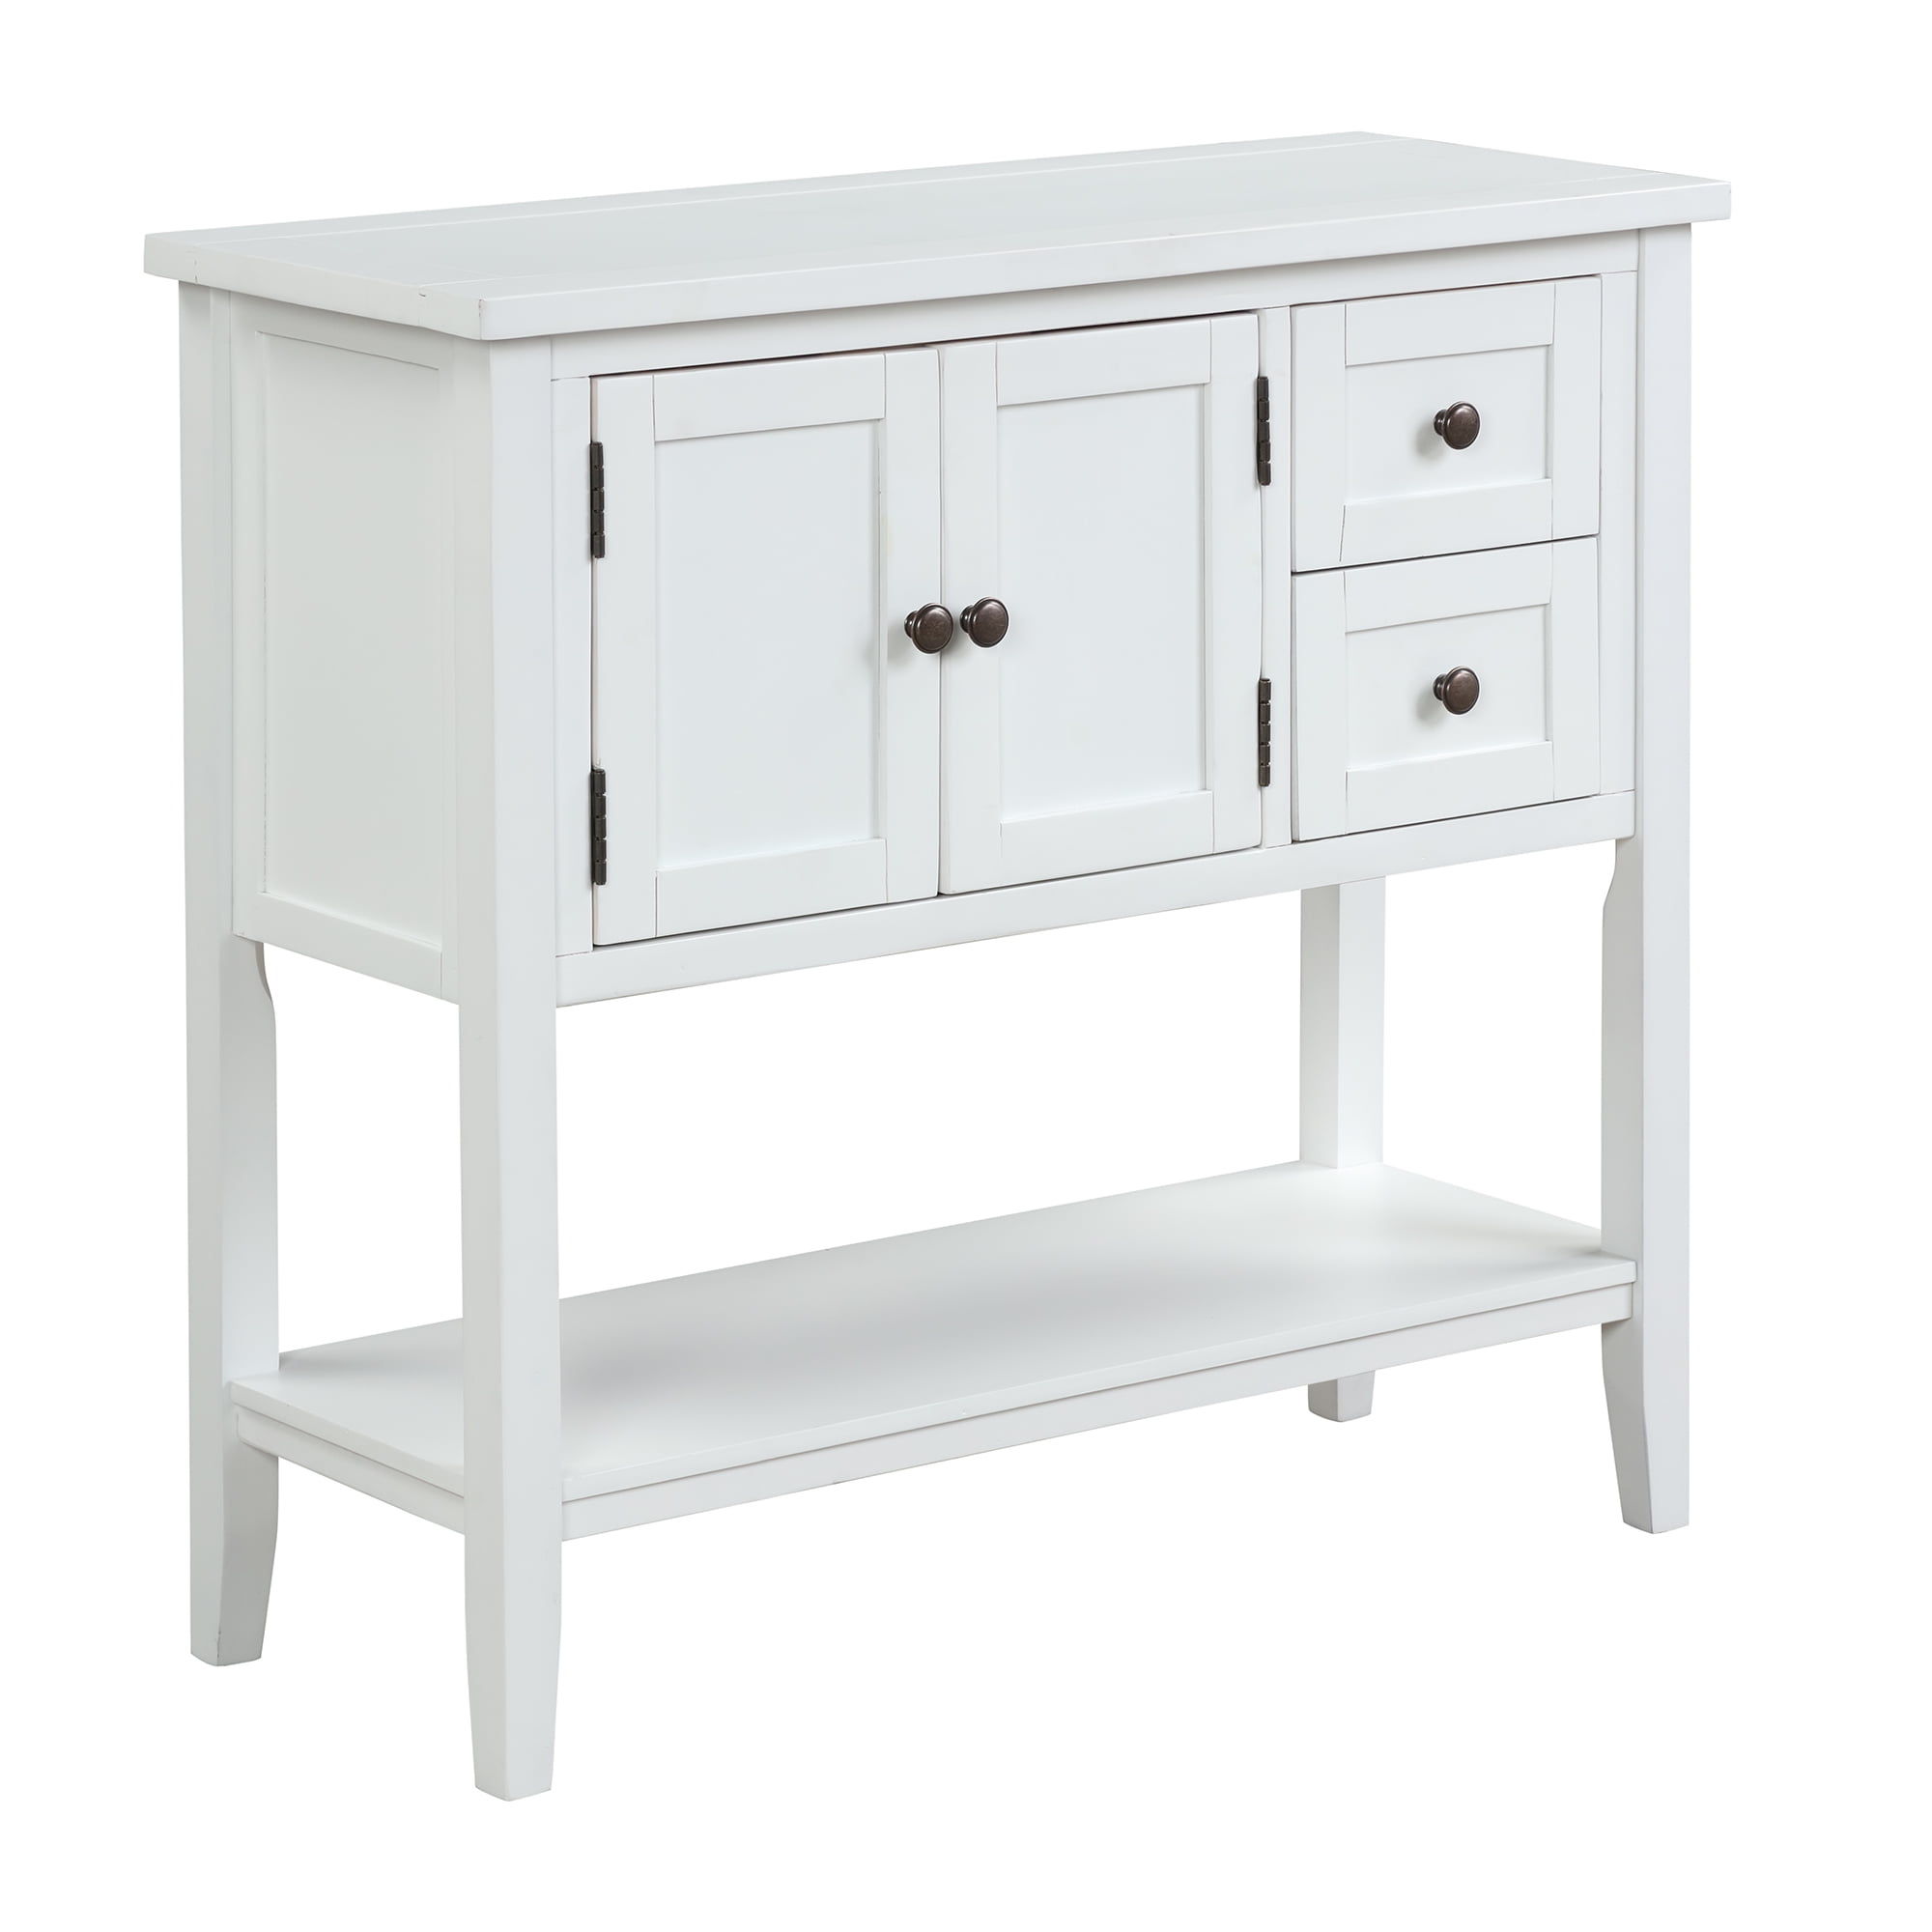 Details about   Coffee tables furniture buffet cabinet Home Storage Rack Bedside Table White... 